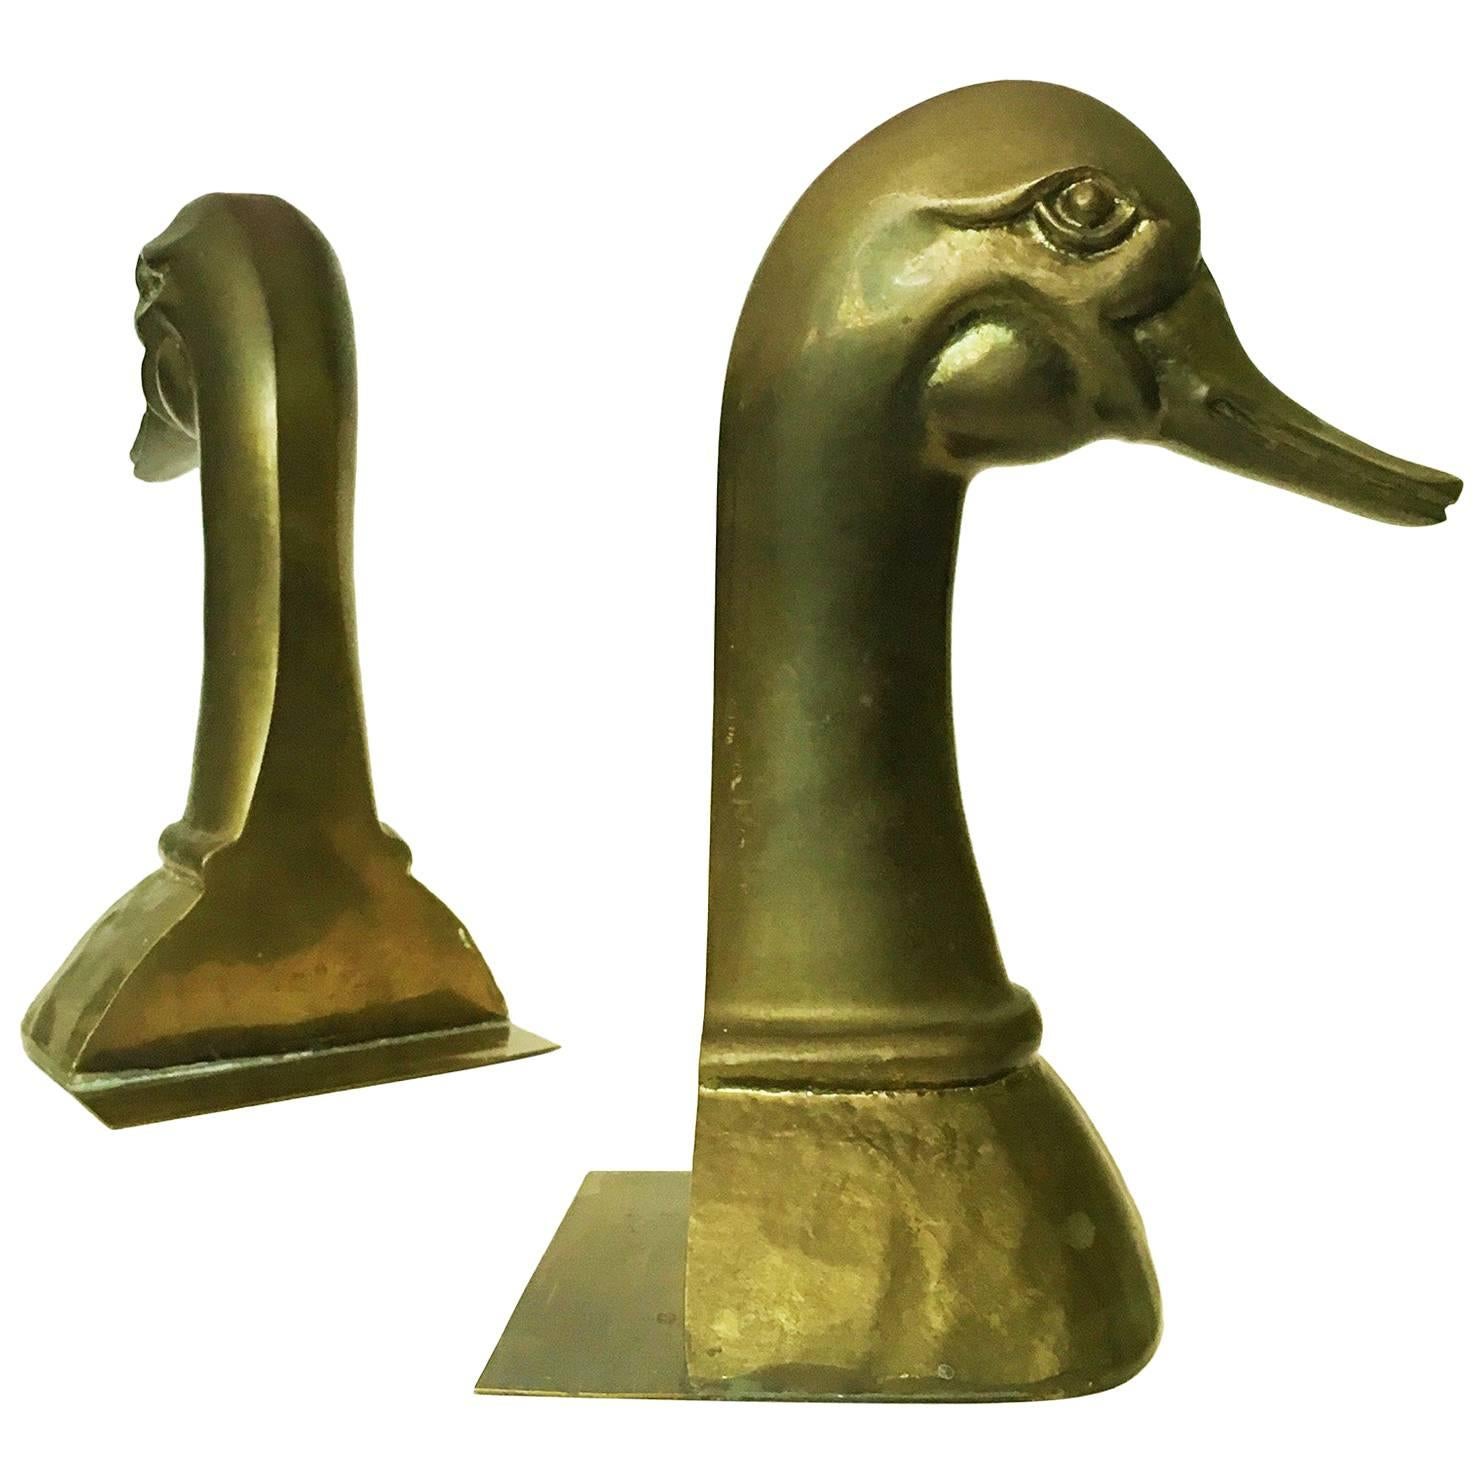 Brass Bookends from the 1970s